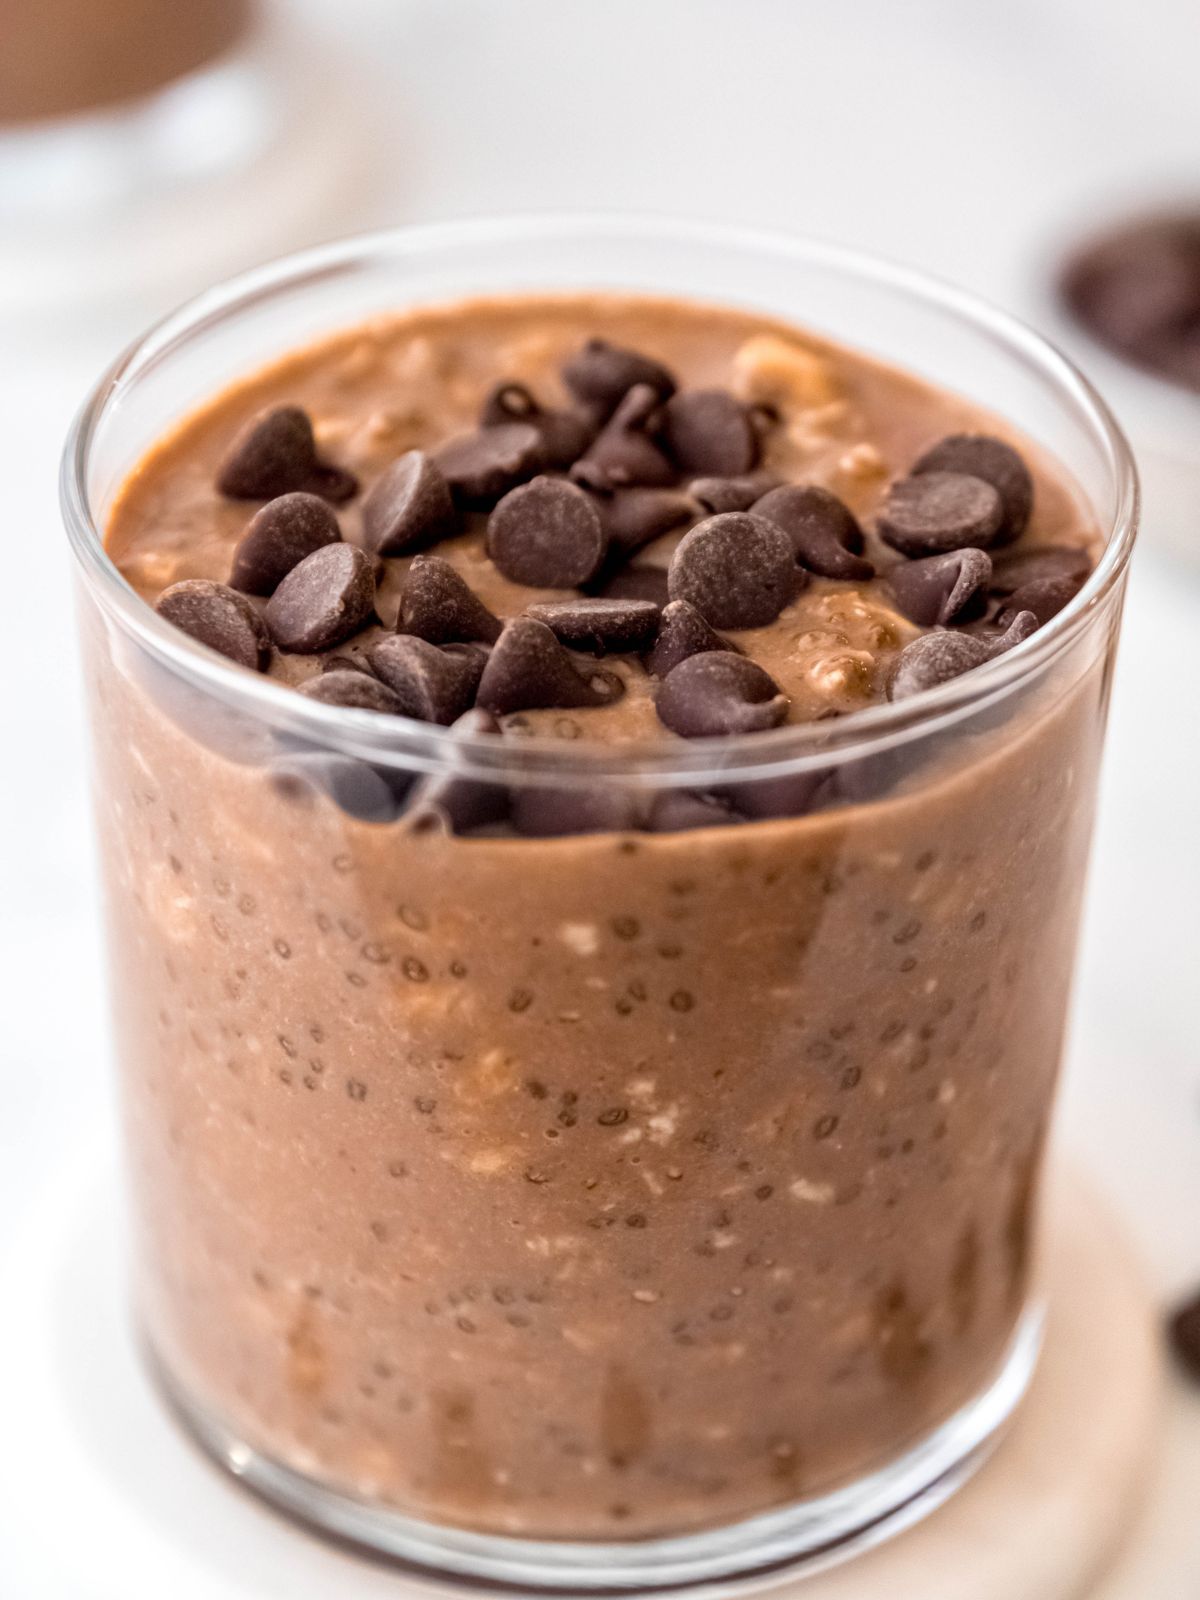 45 degree angle shot of a clear glass of chocolate overnight oats with peanut butter, protein powder, chia seeds, and chocolate chips.